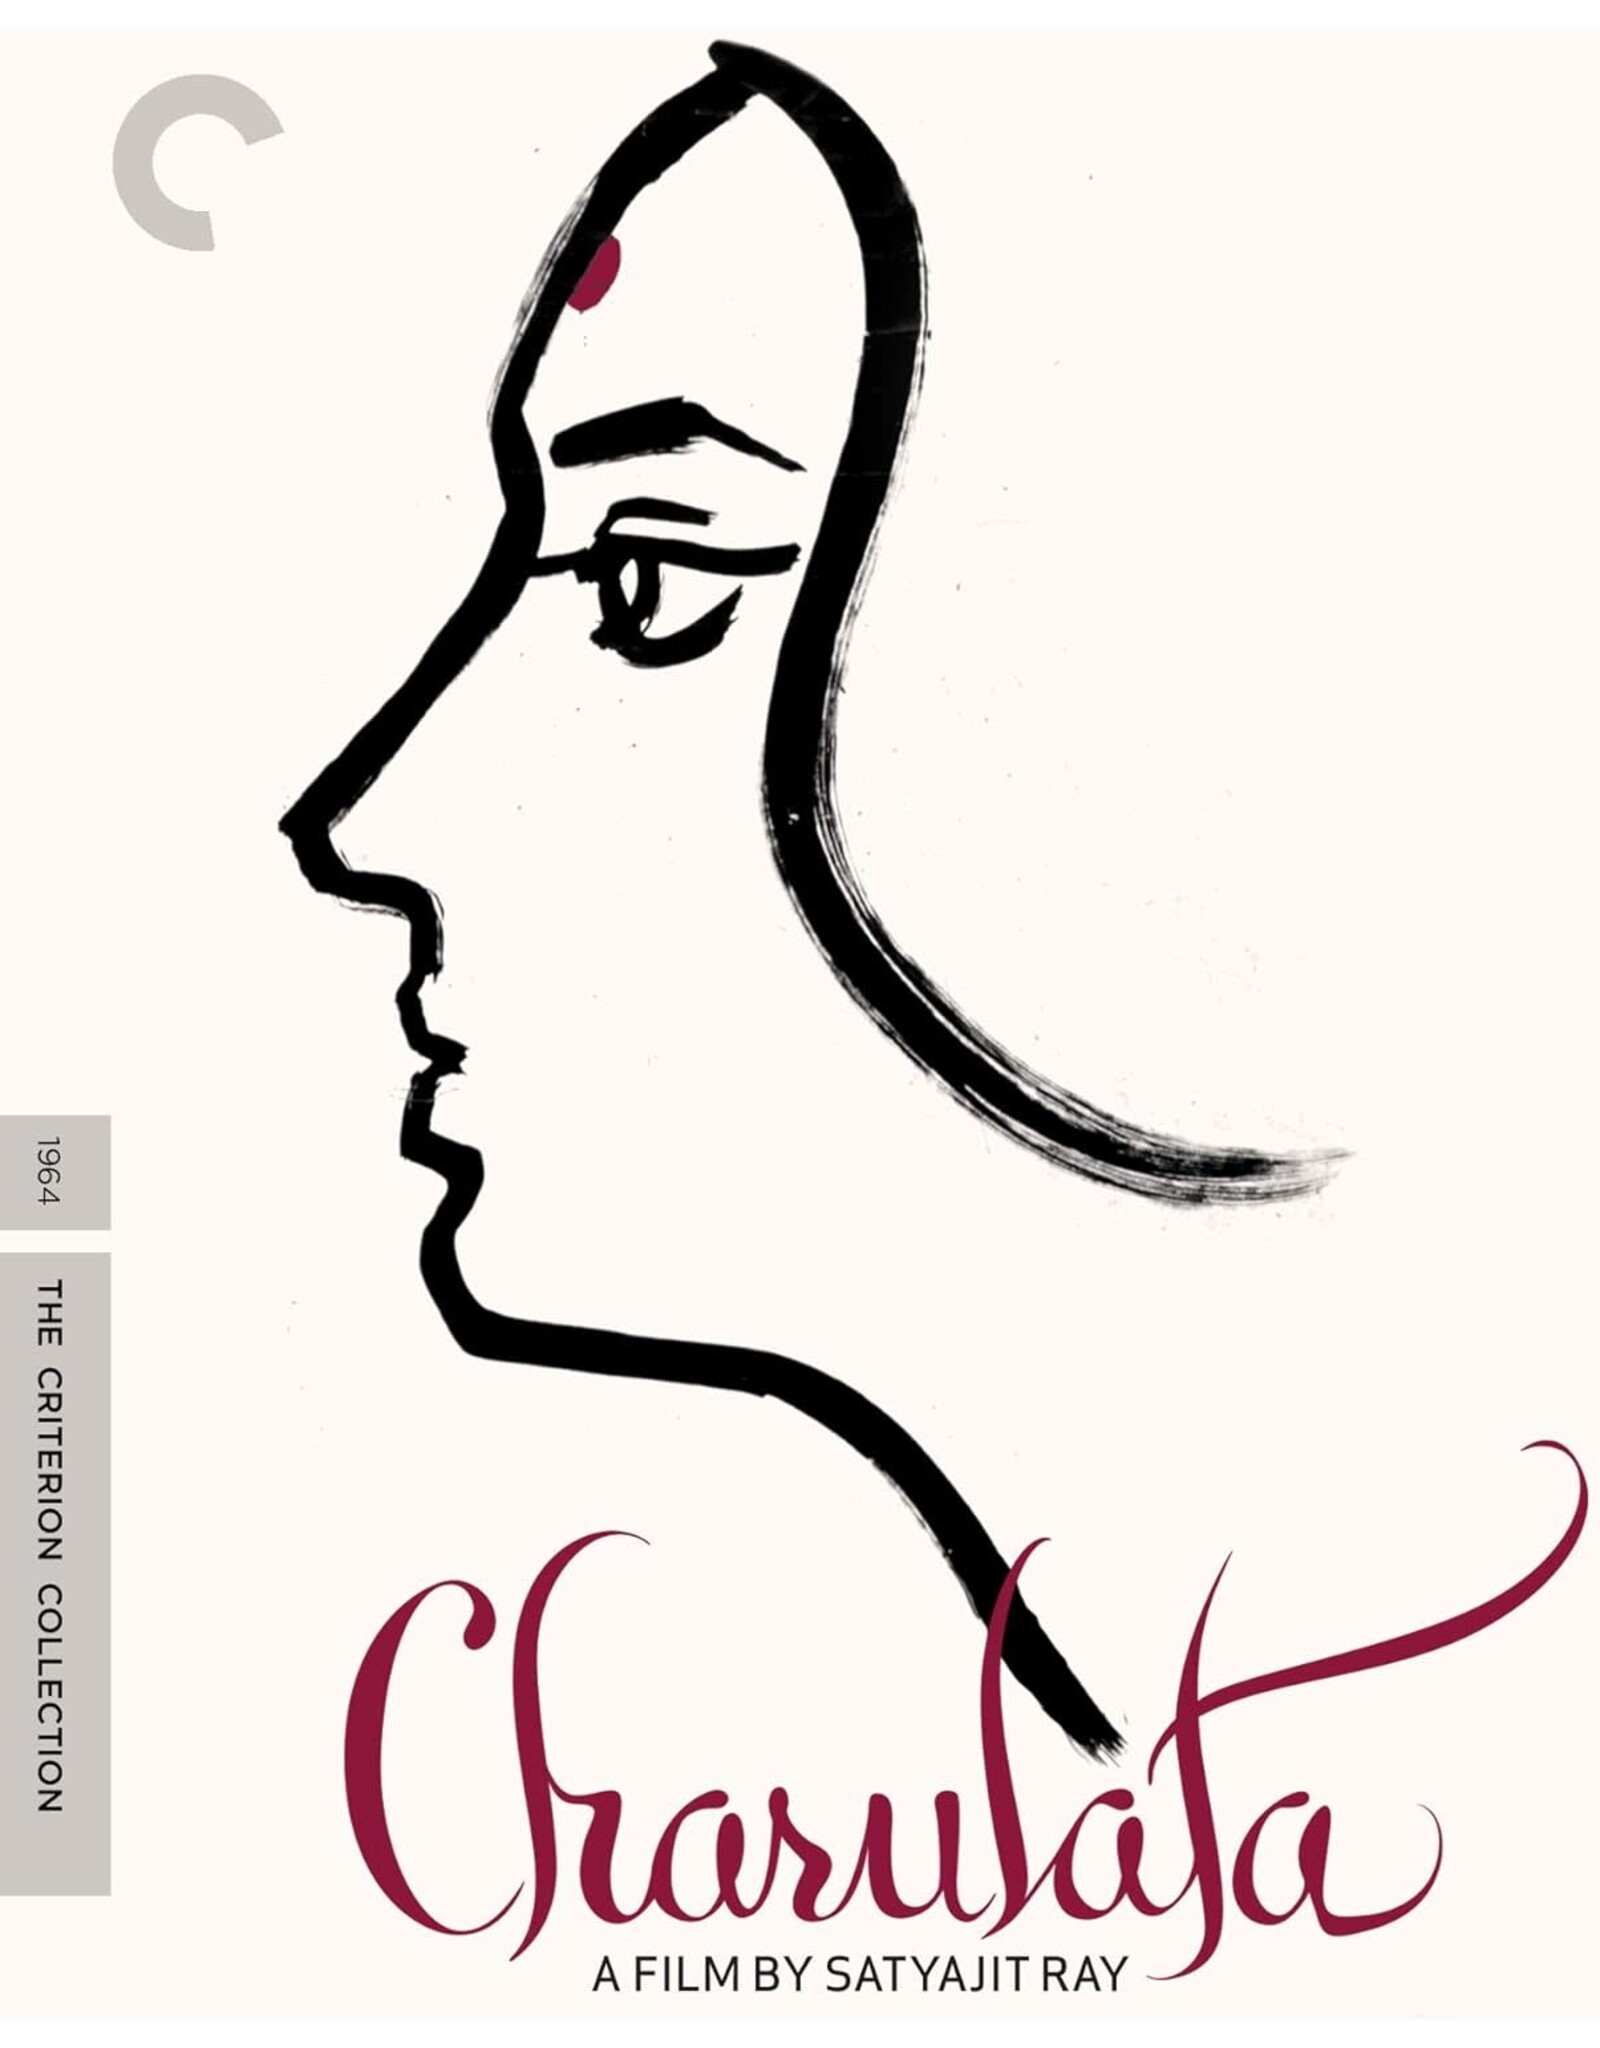 Criterion Collection Charulata - Criterion Collection (Used)